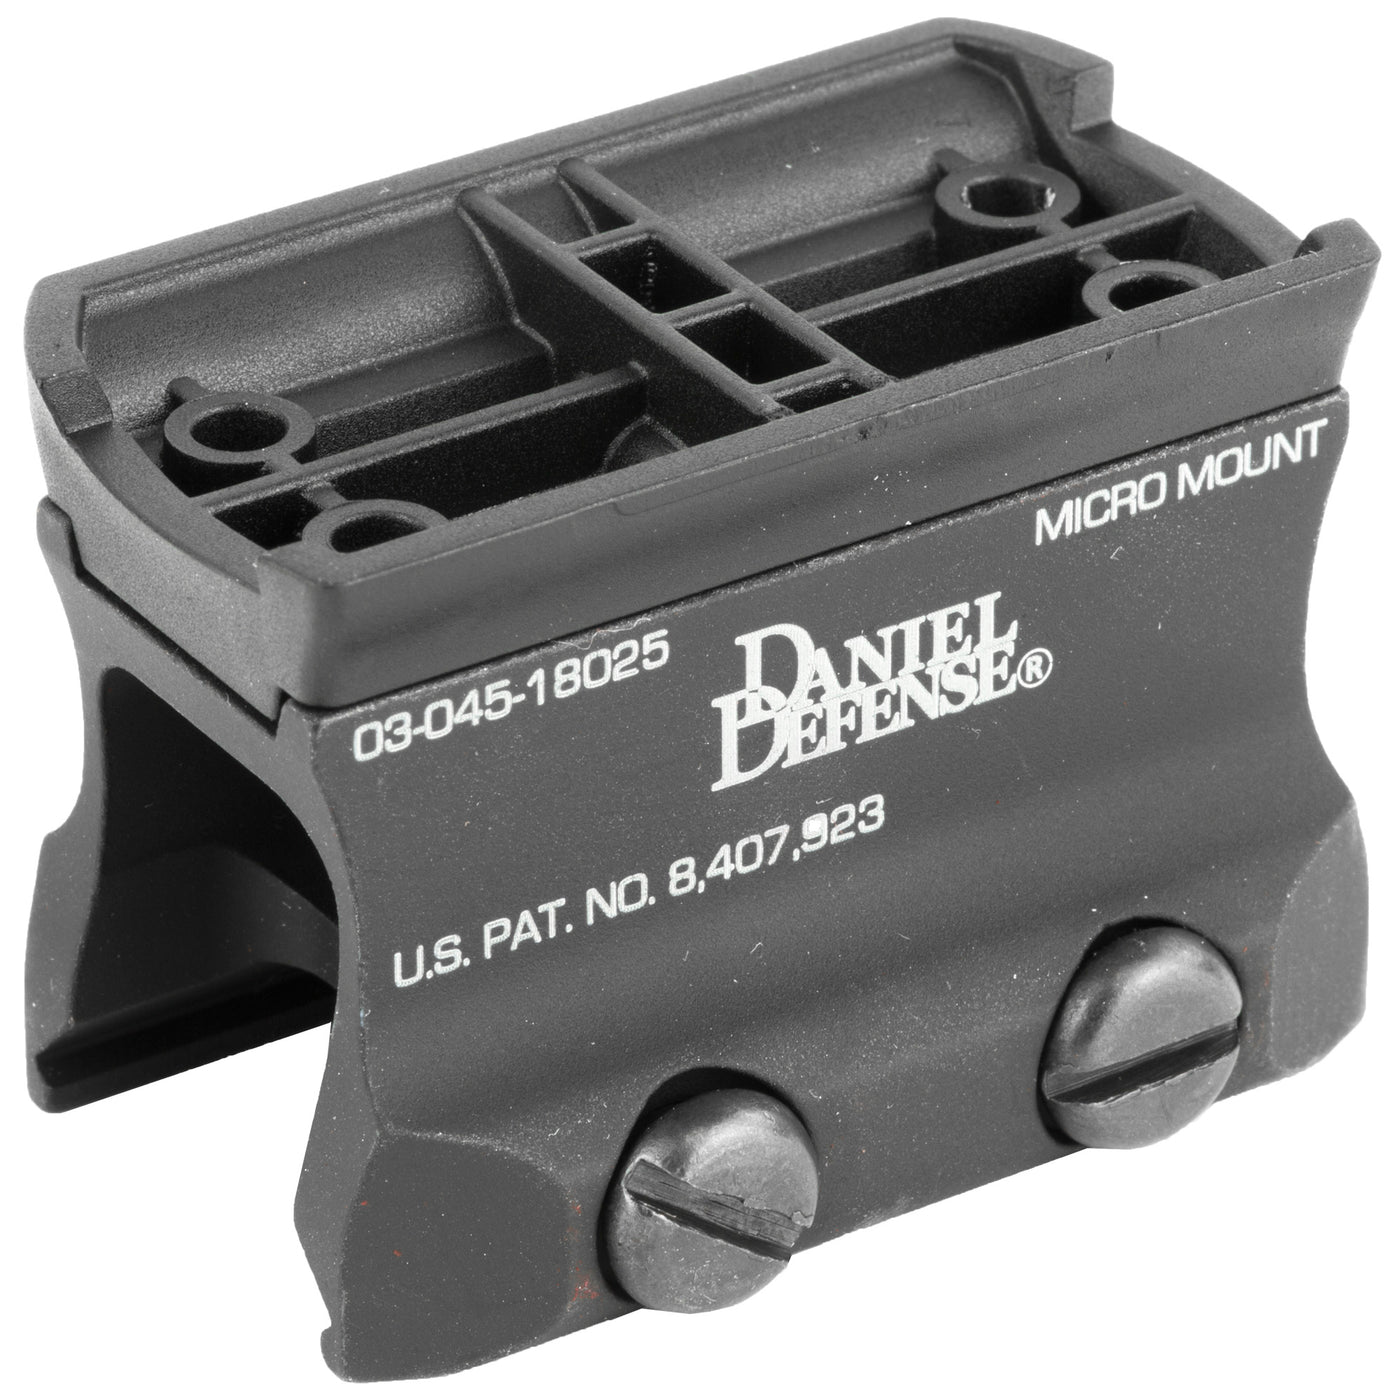 Dd Micro Aimpoint Mount Blk (tall)